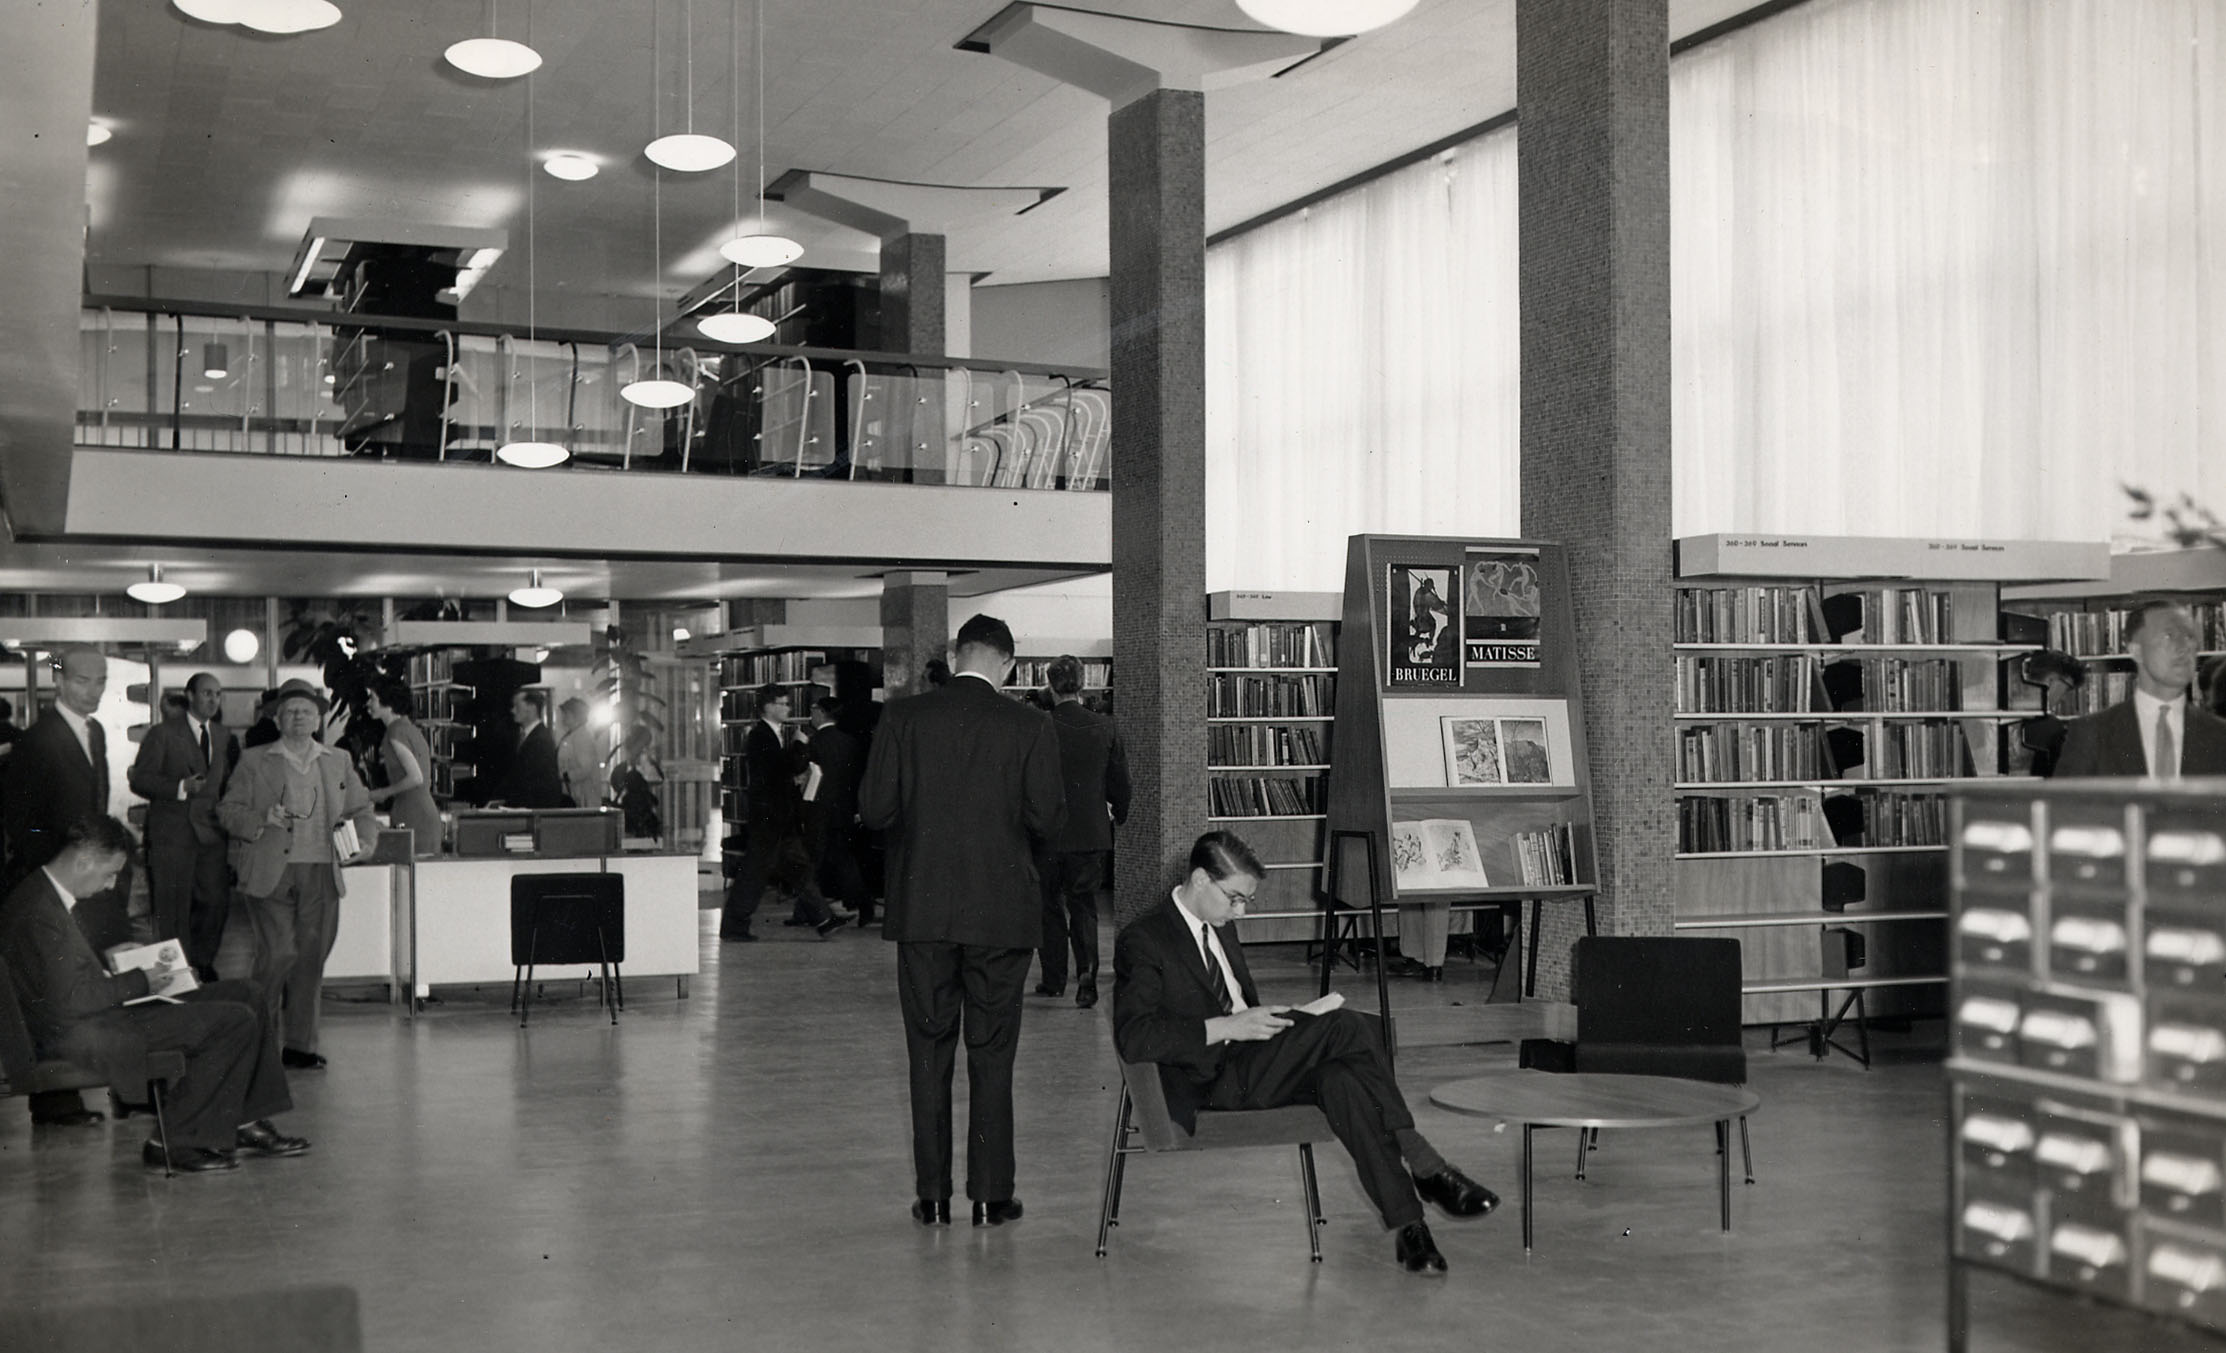 image of Holborn Library